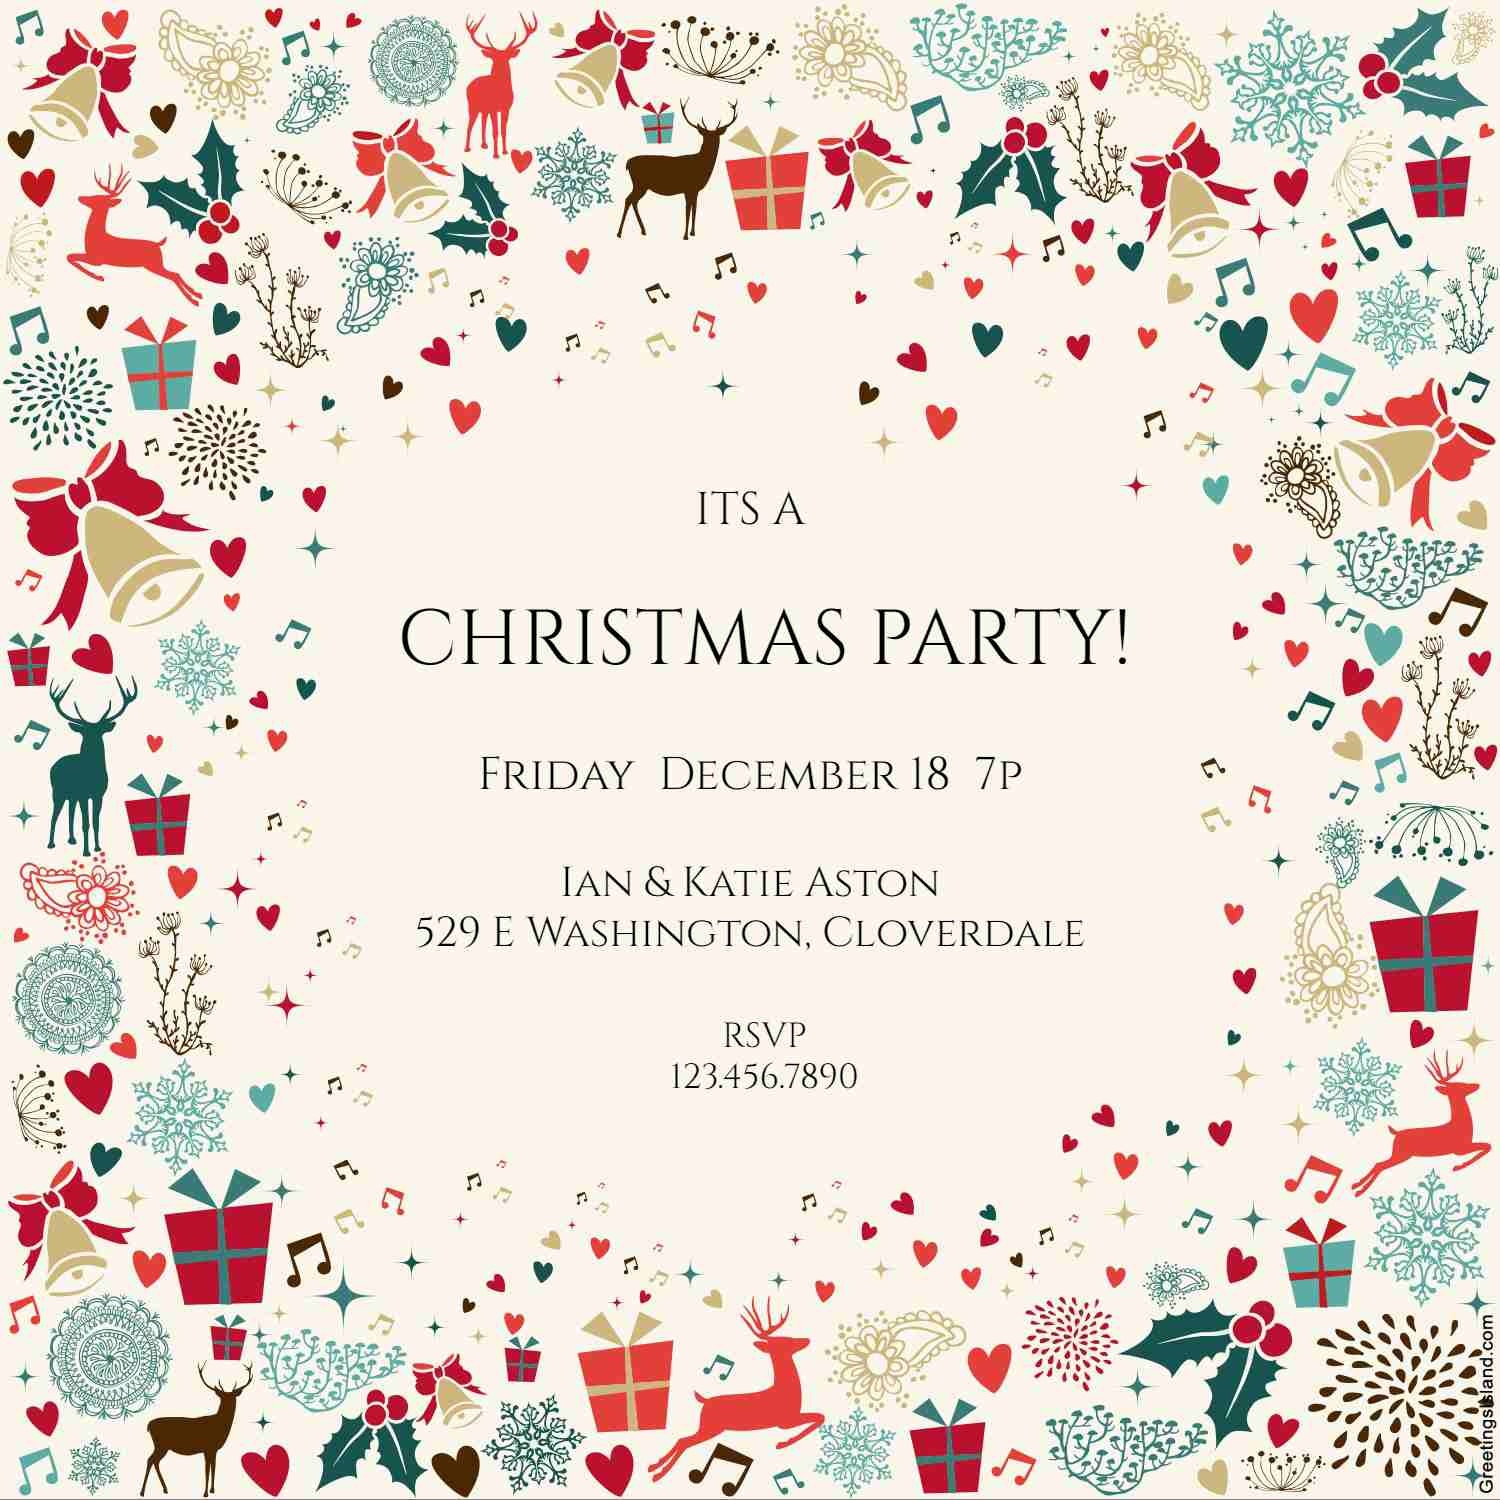 10 Free Christmas Party Invitations That You Can Print - Free Printable Personalized Christmas Invitations